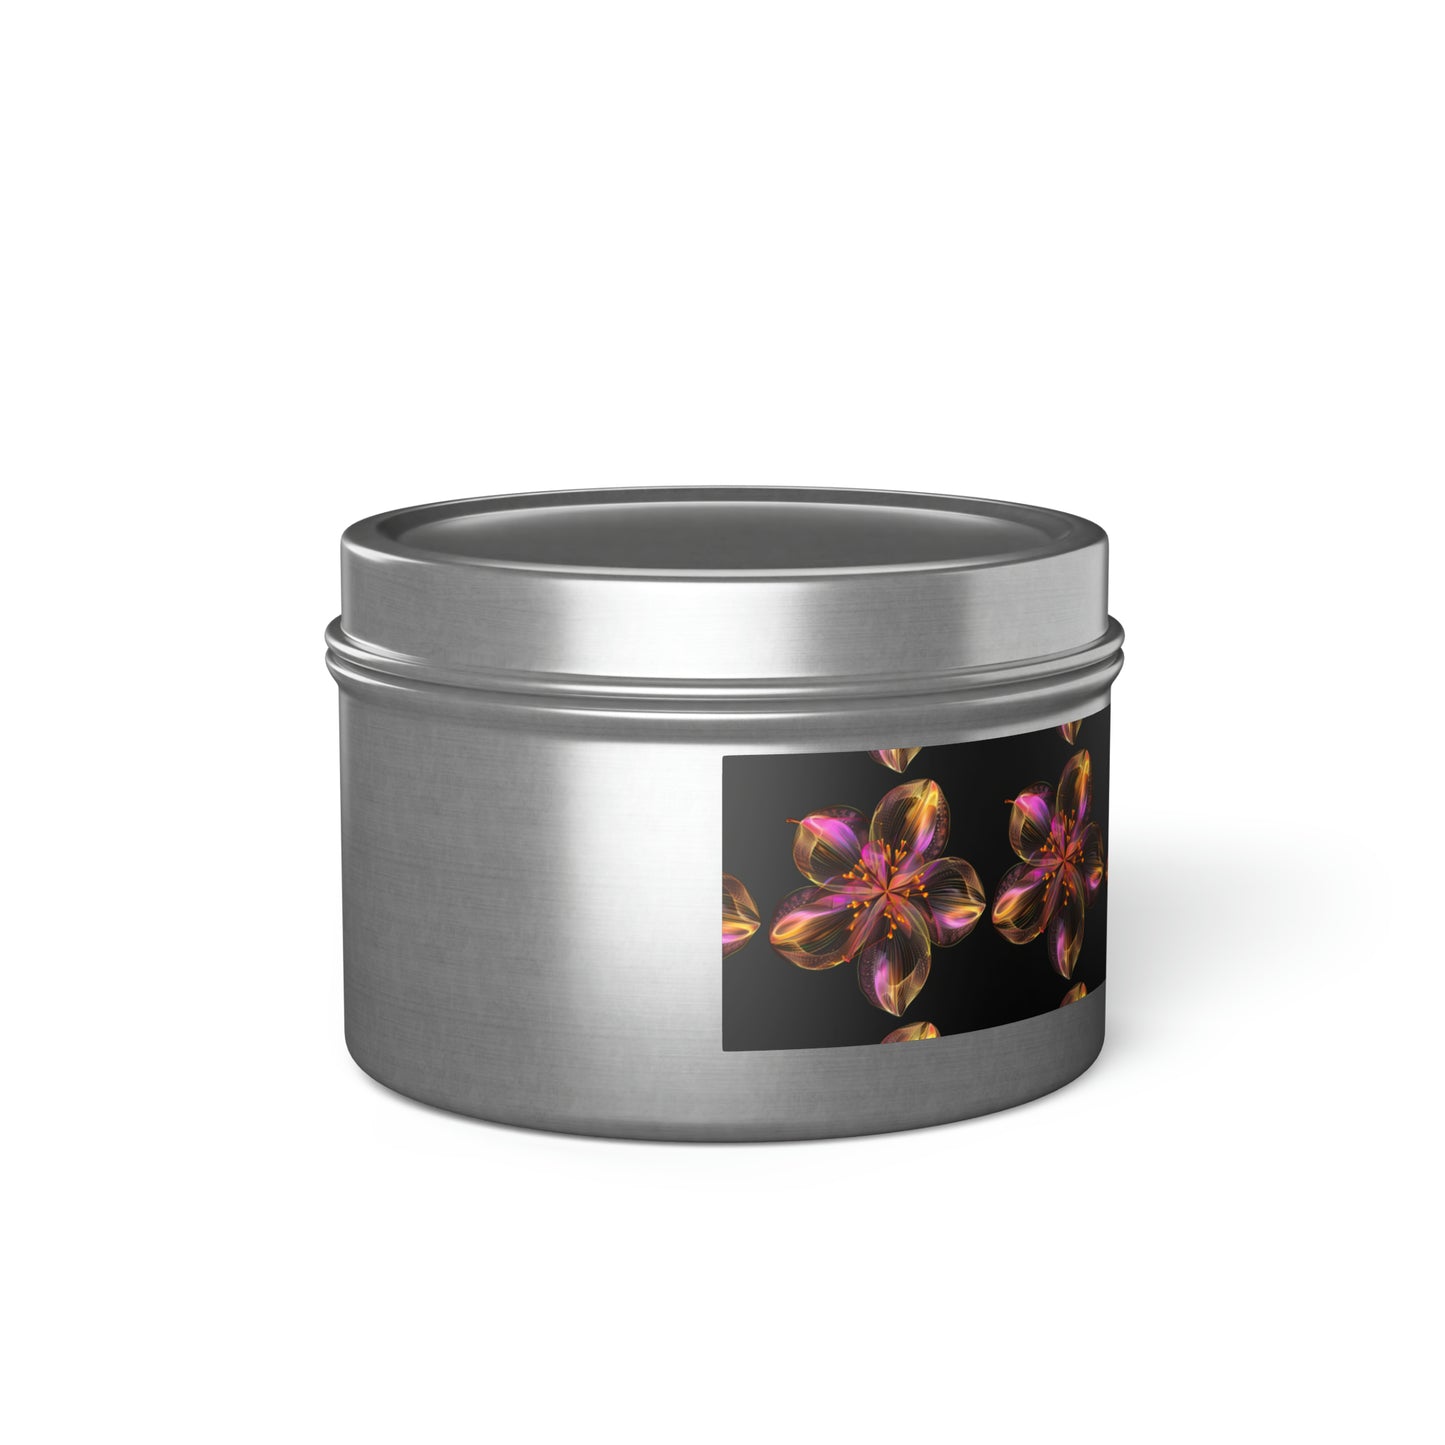 -Serenity Now: Aromatherapy Tin Candles for Yoga & Wellness- lead and zinc-free